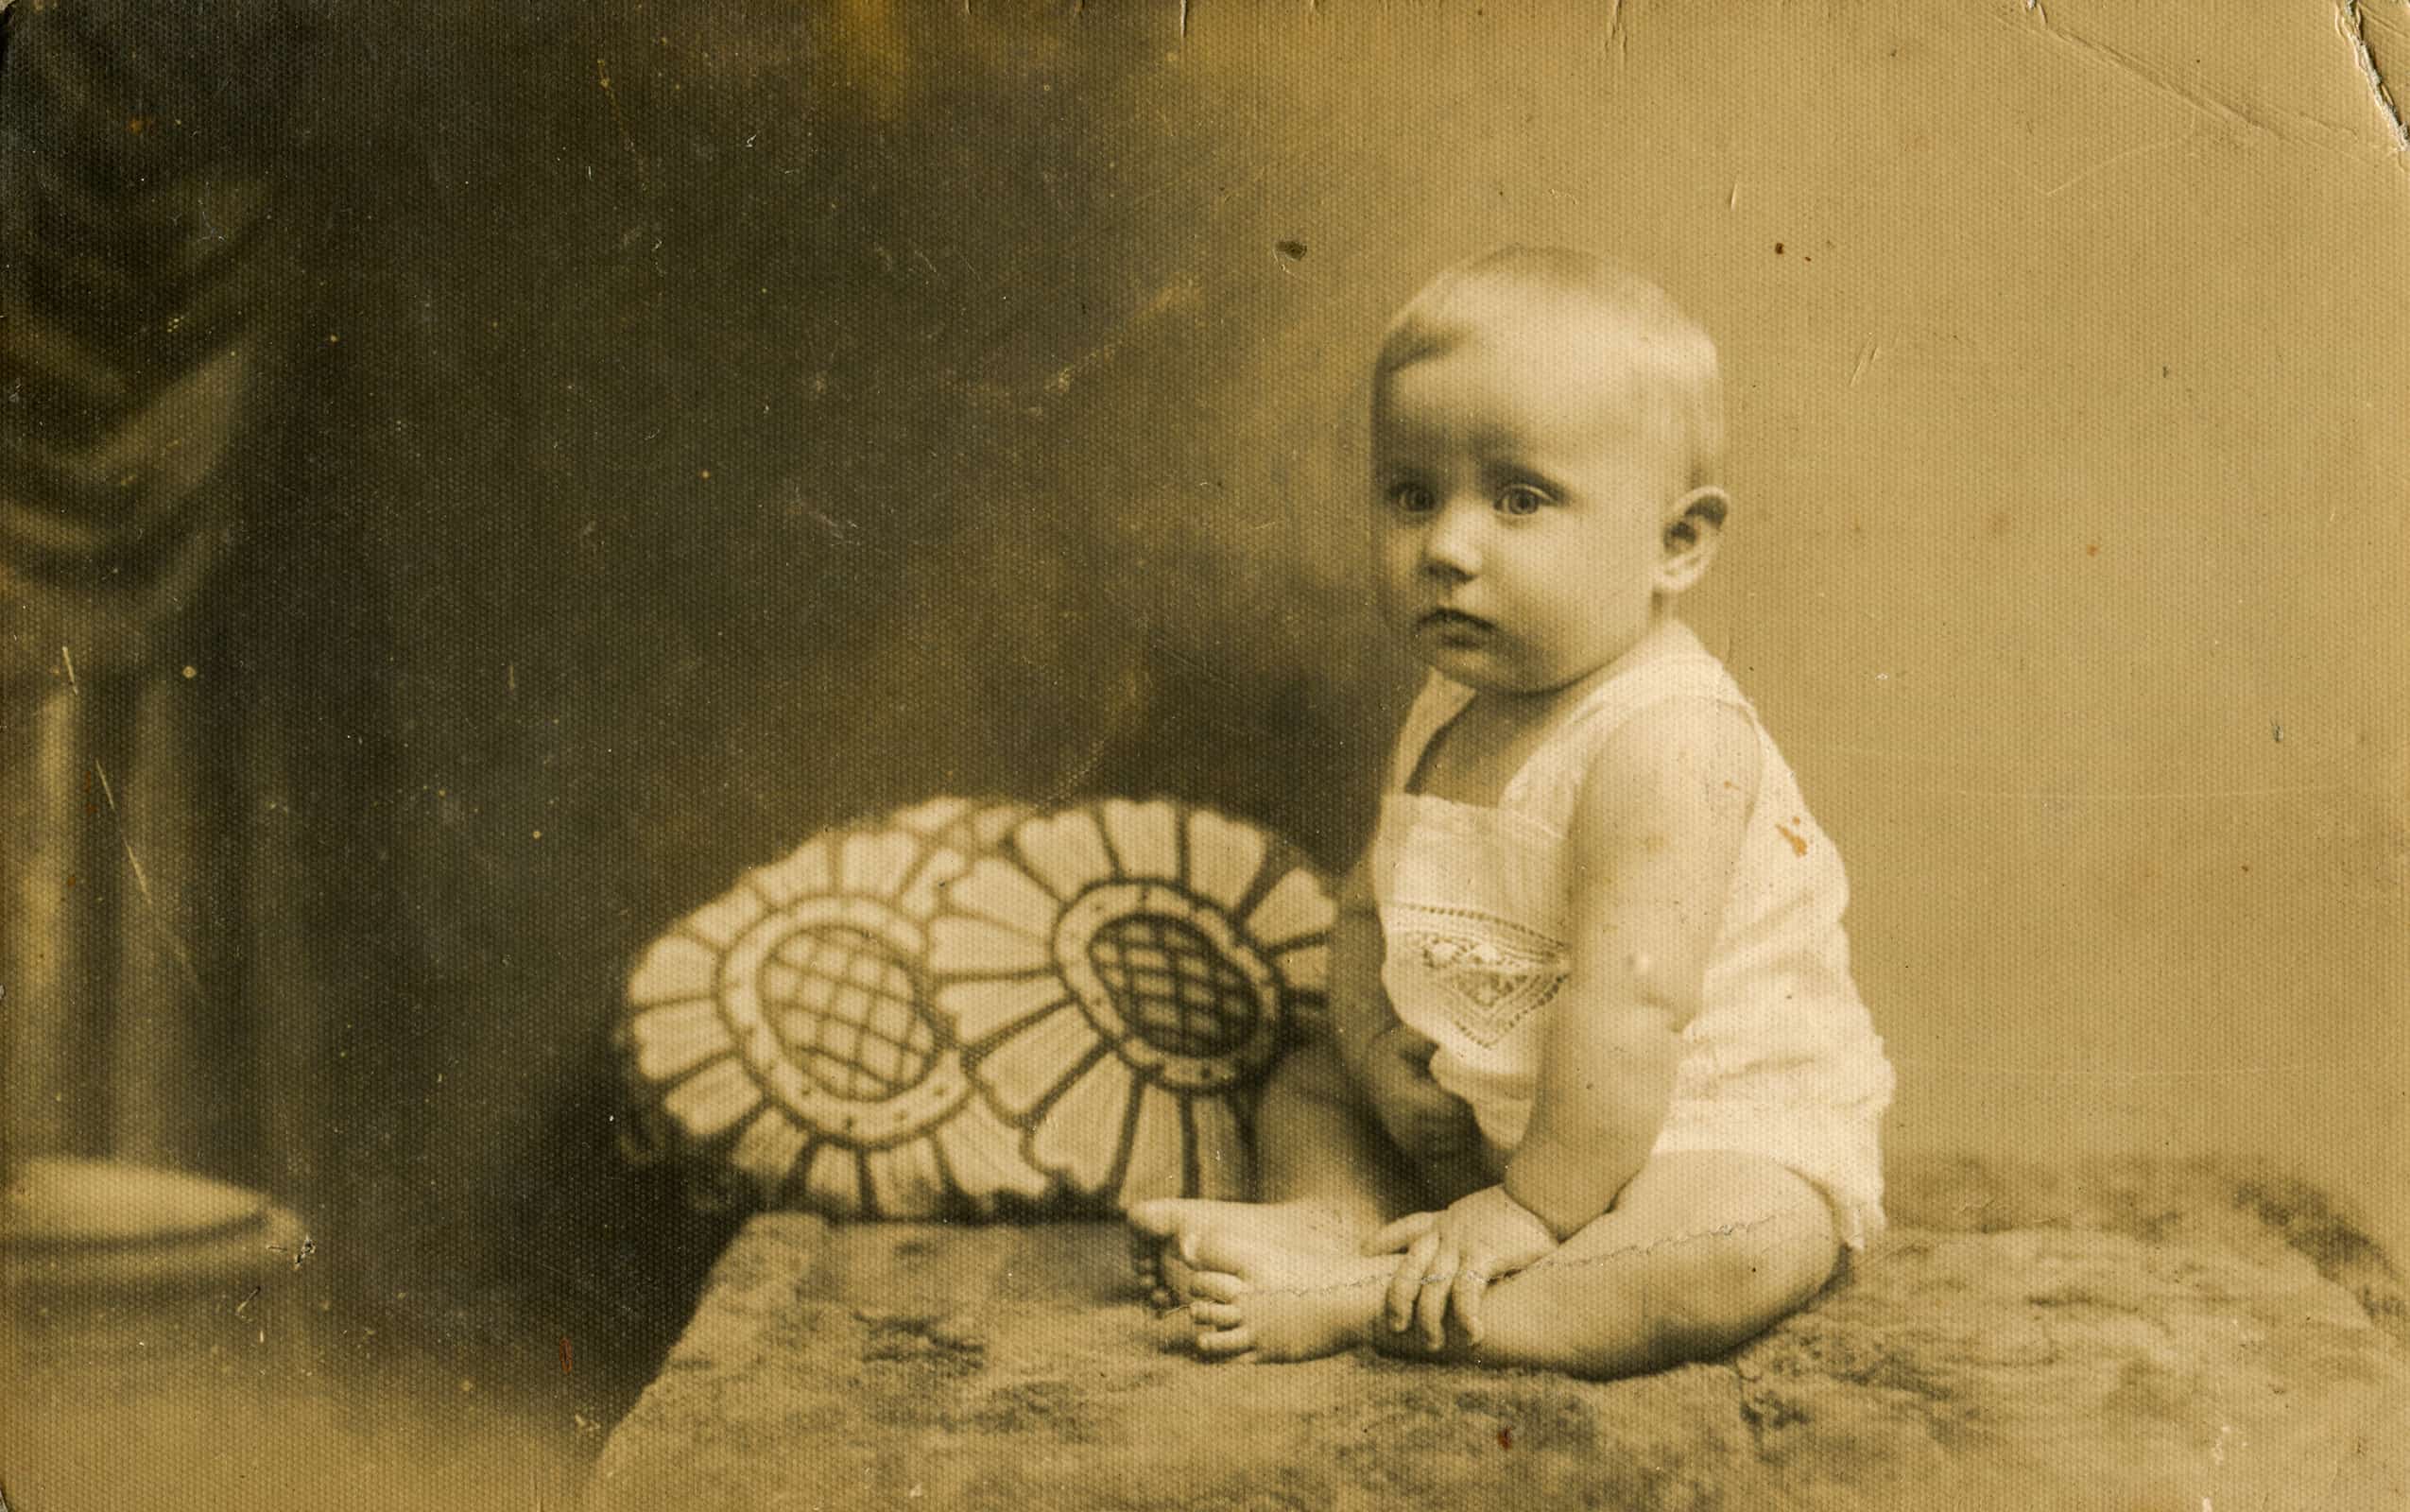 Top 100 Baby Names for the 1890s